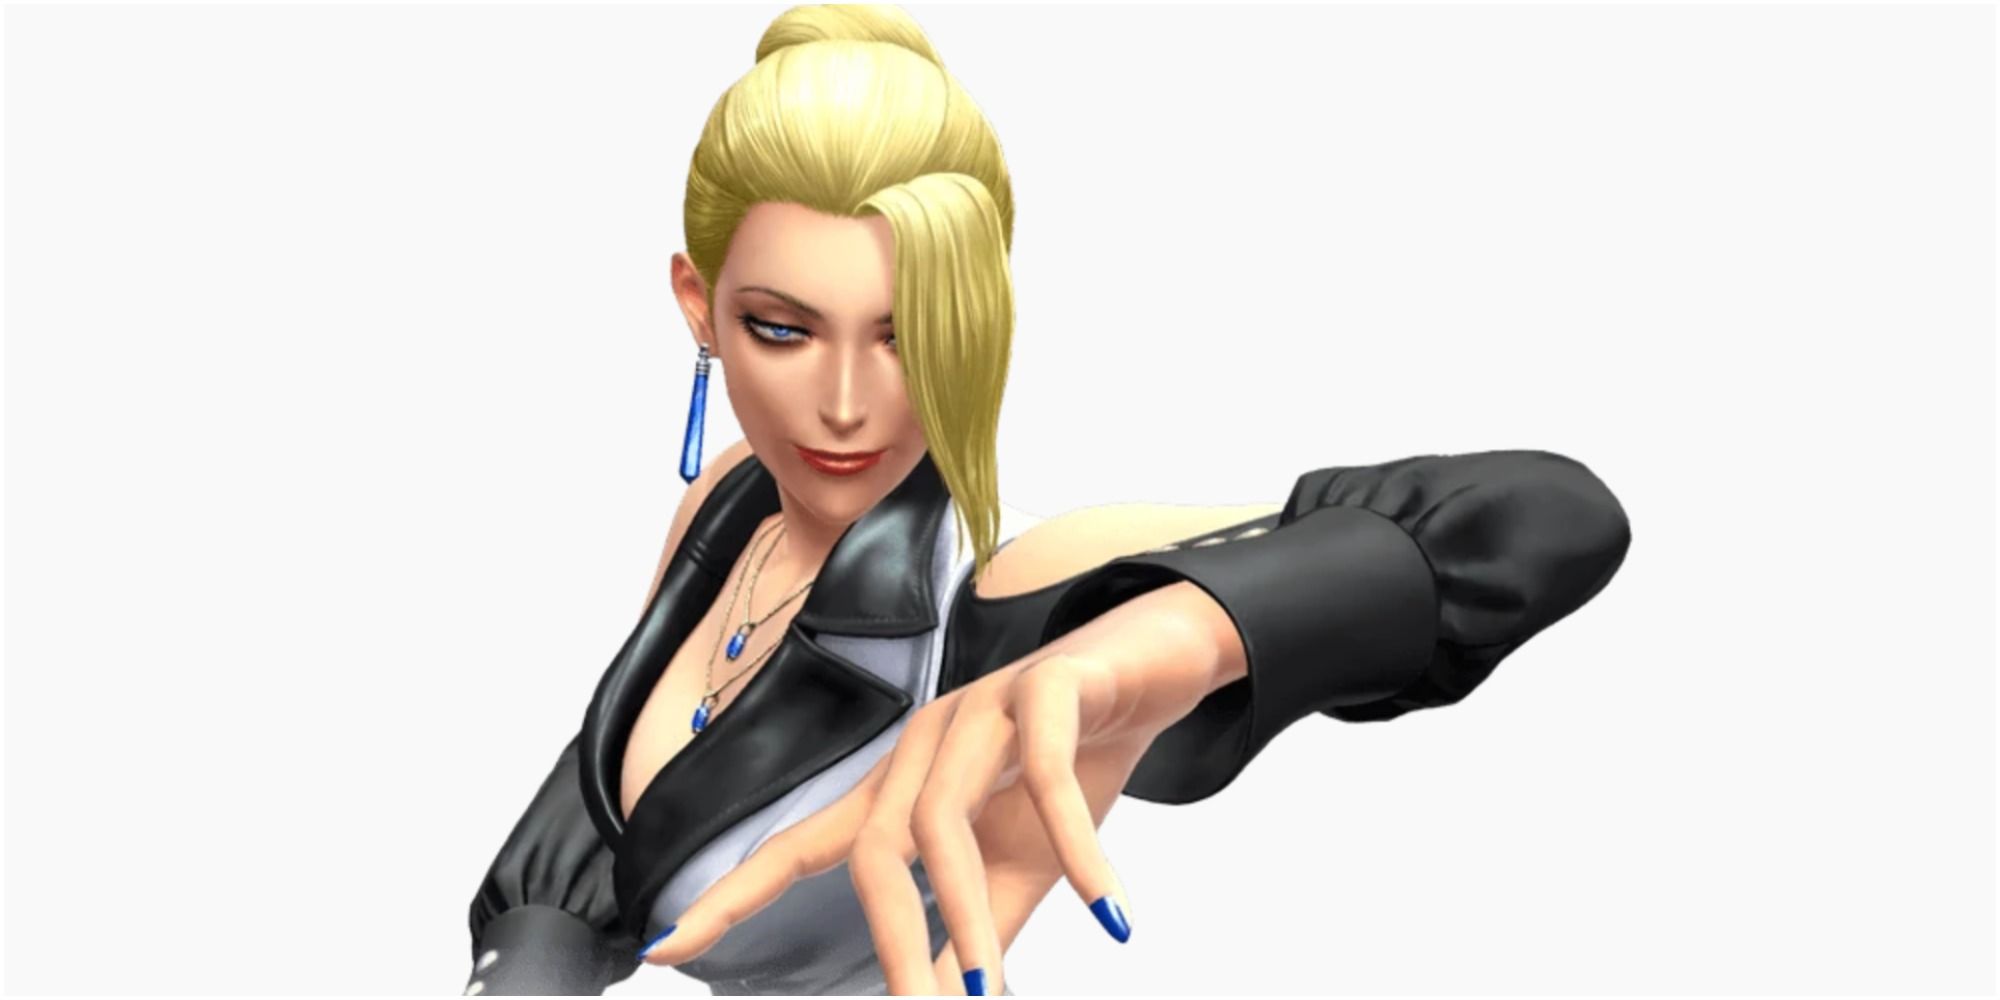 Mature from the King Of Fighters series